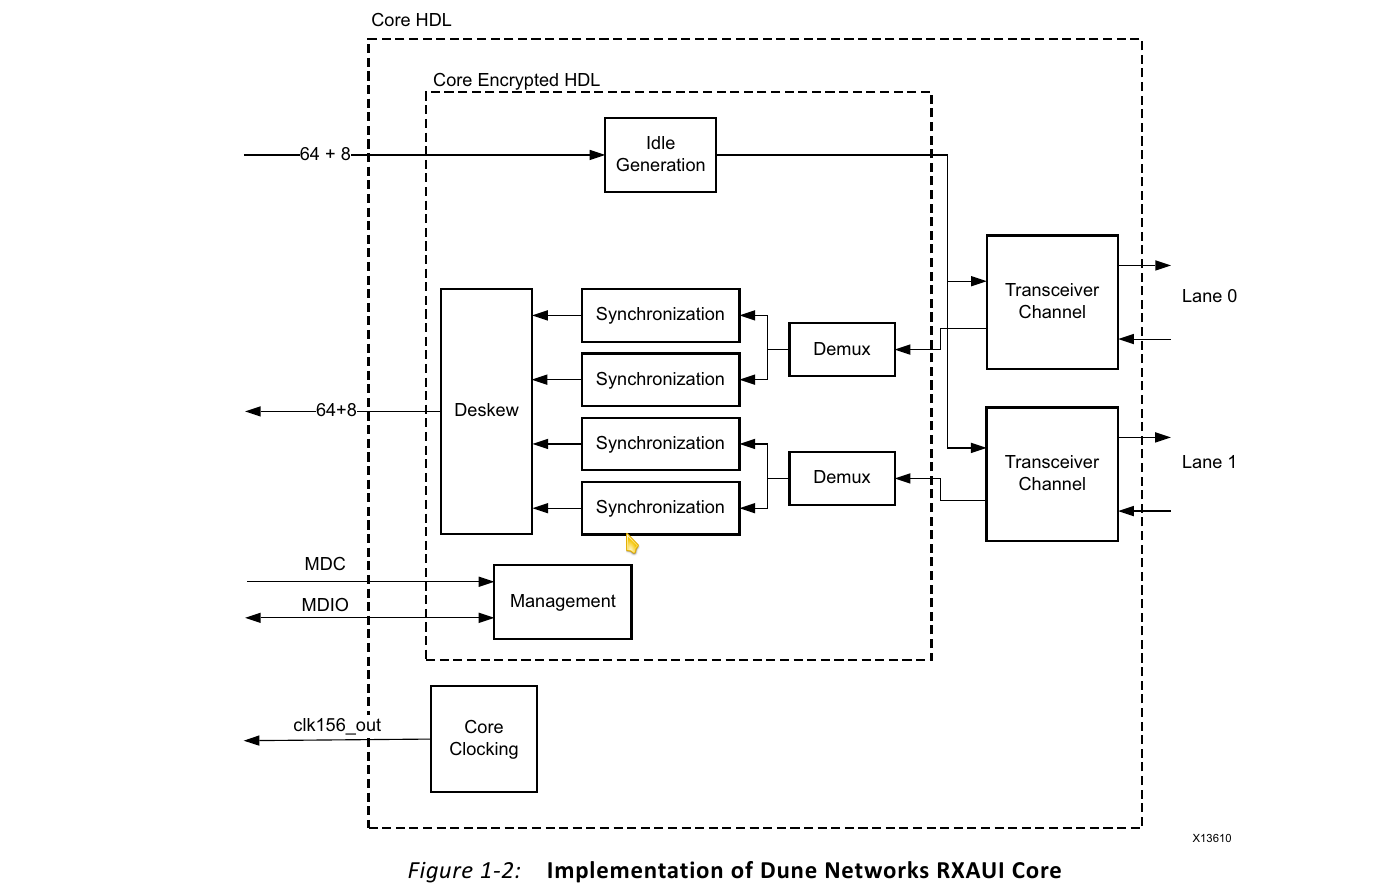 Implementation of Dune Networks of RXAUI IP Core